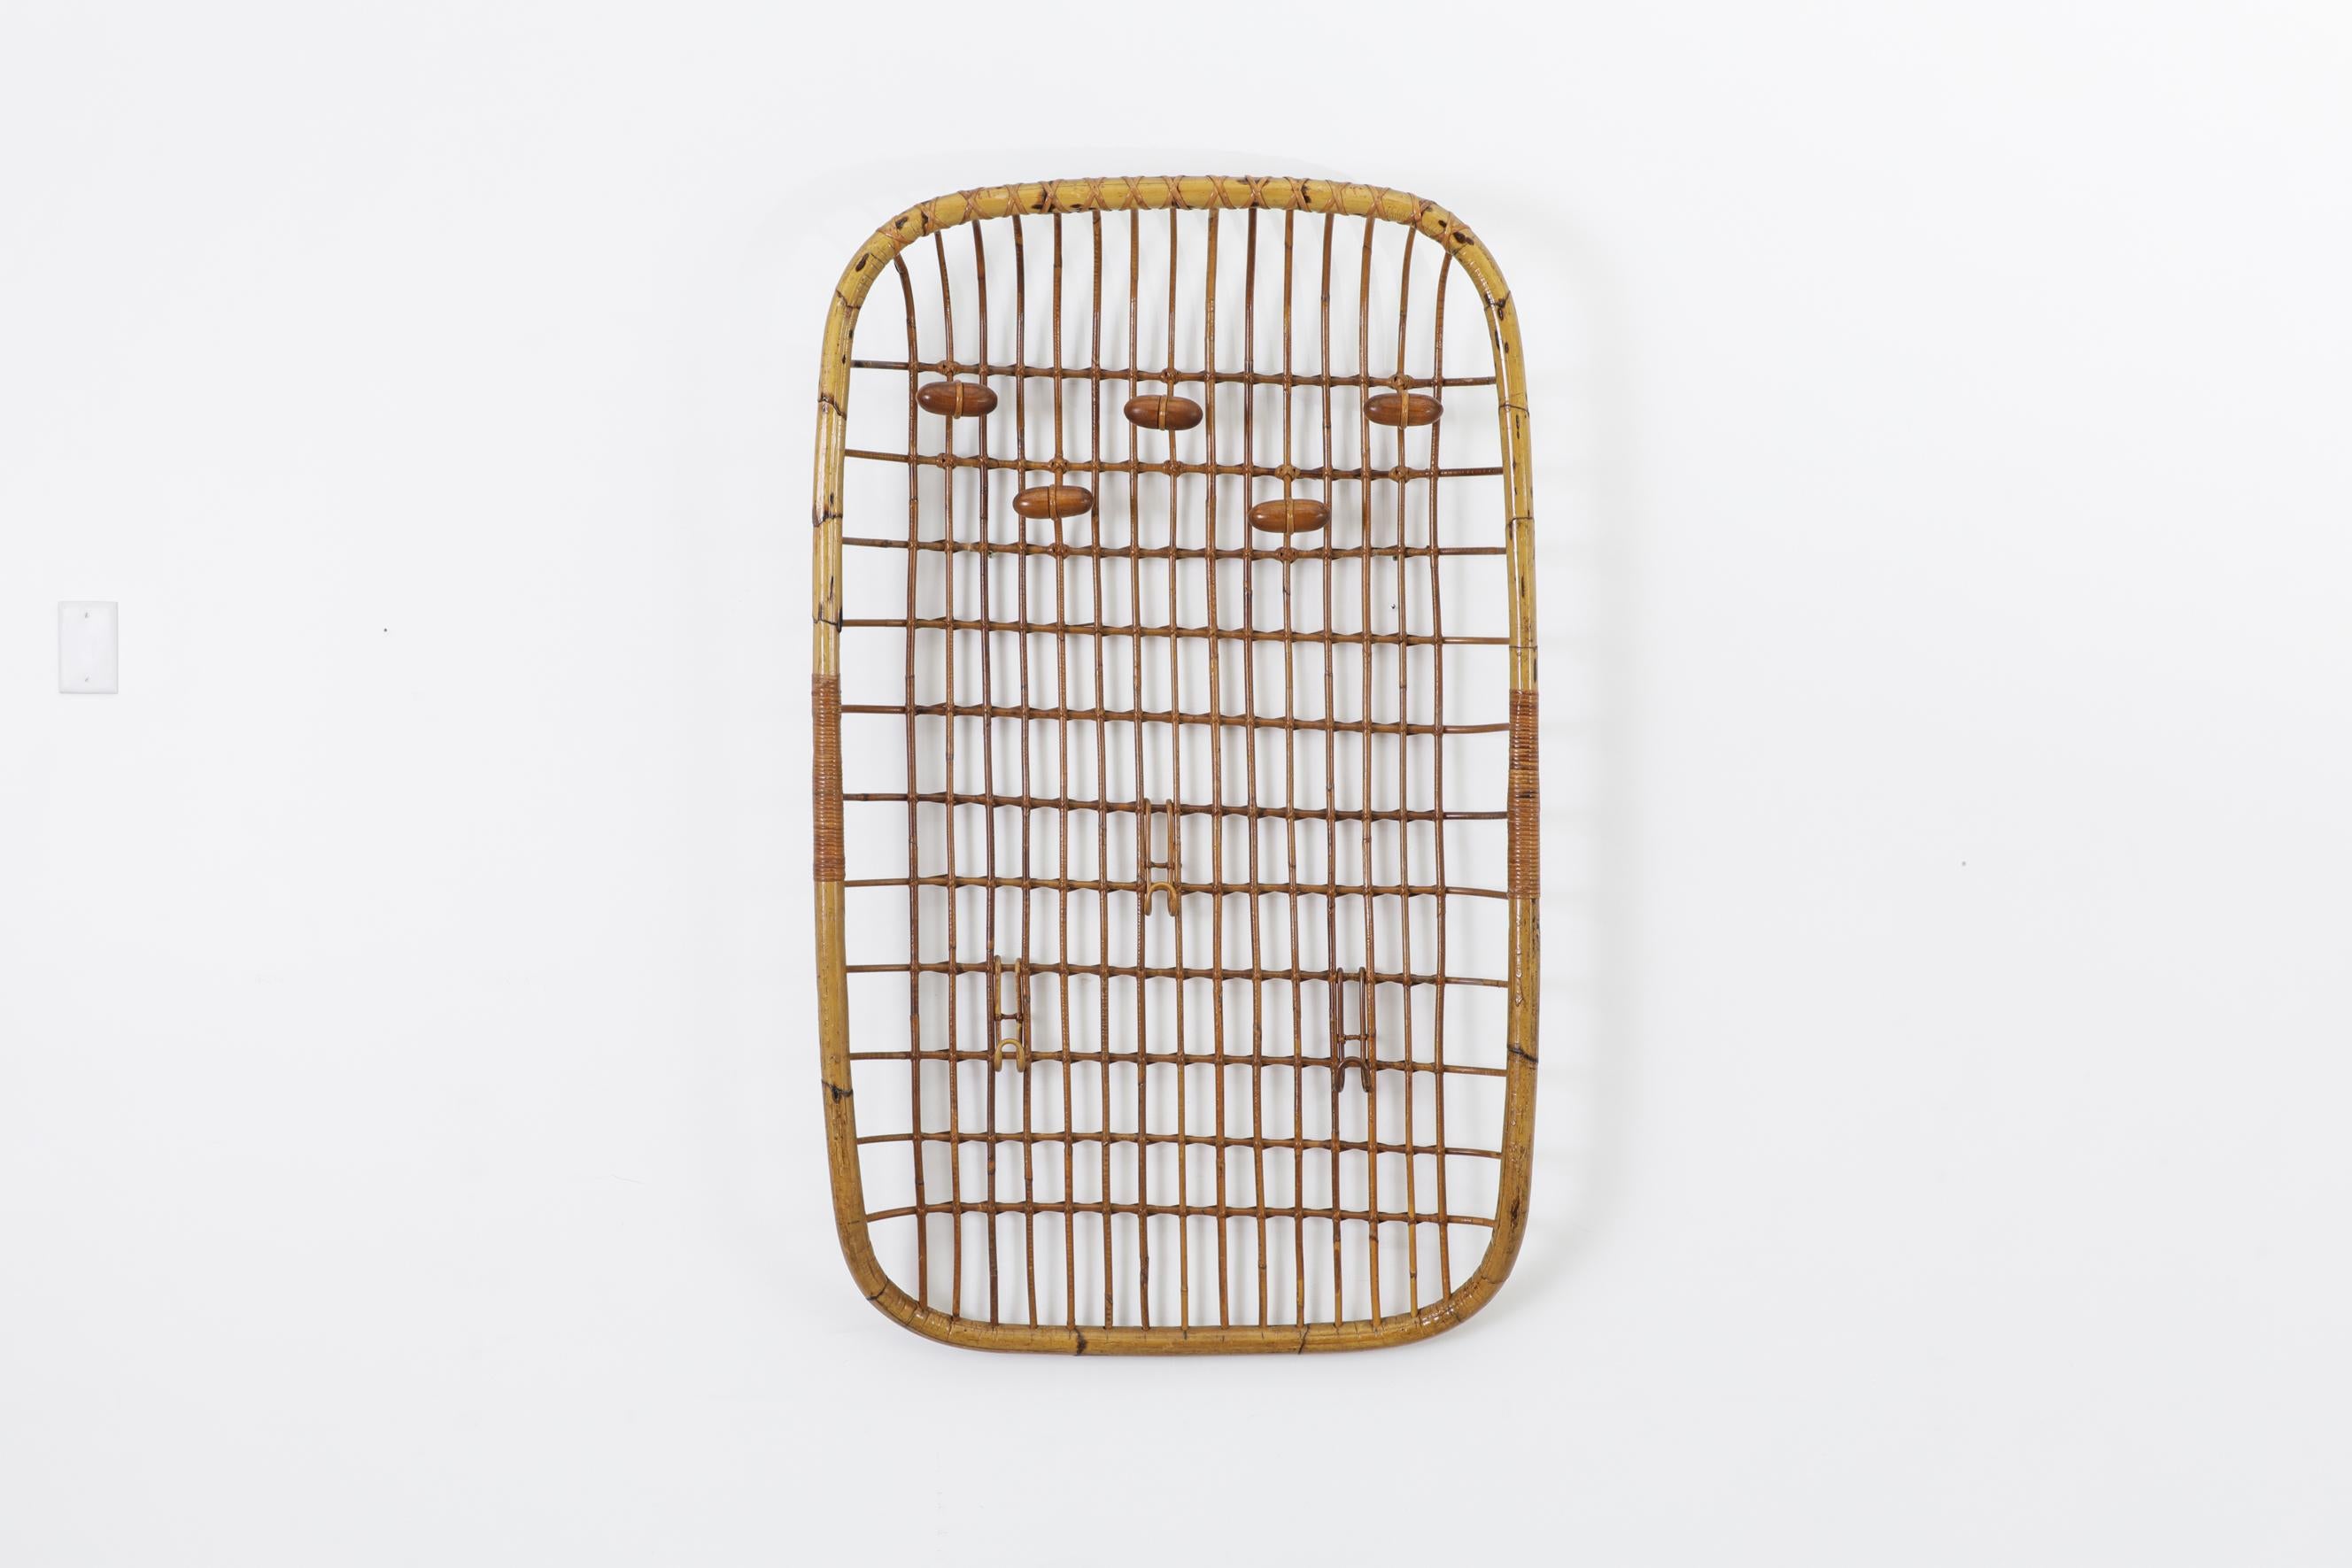 Wall mounted bamboo coat rack with hooks and rattan accents by Olaf Von Bohr for Bonacina. In original condition with a handsome patina and visible wear. There is minimal bamboo breakage. The wear is consistent with its age and use.